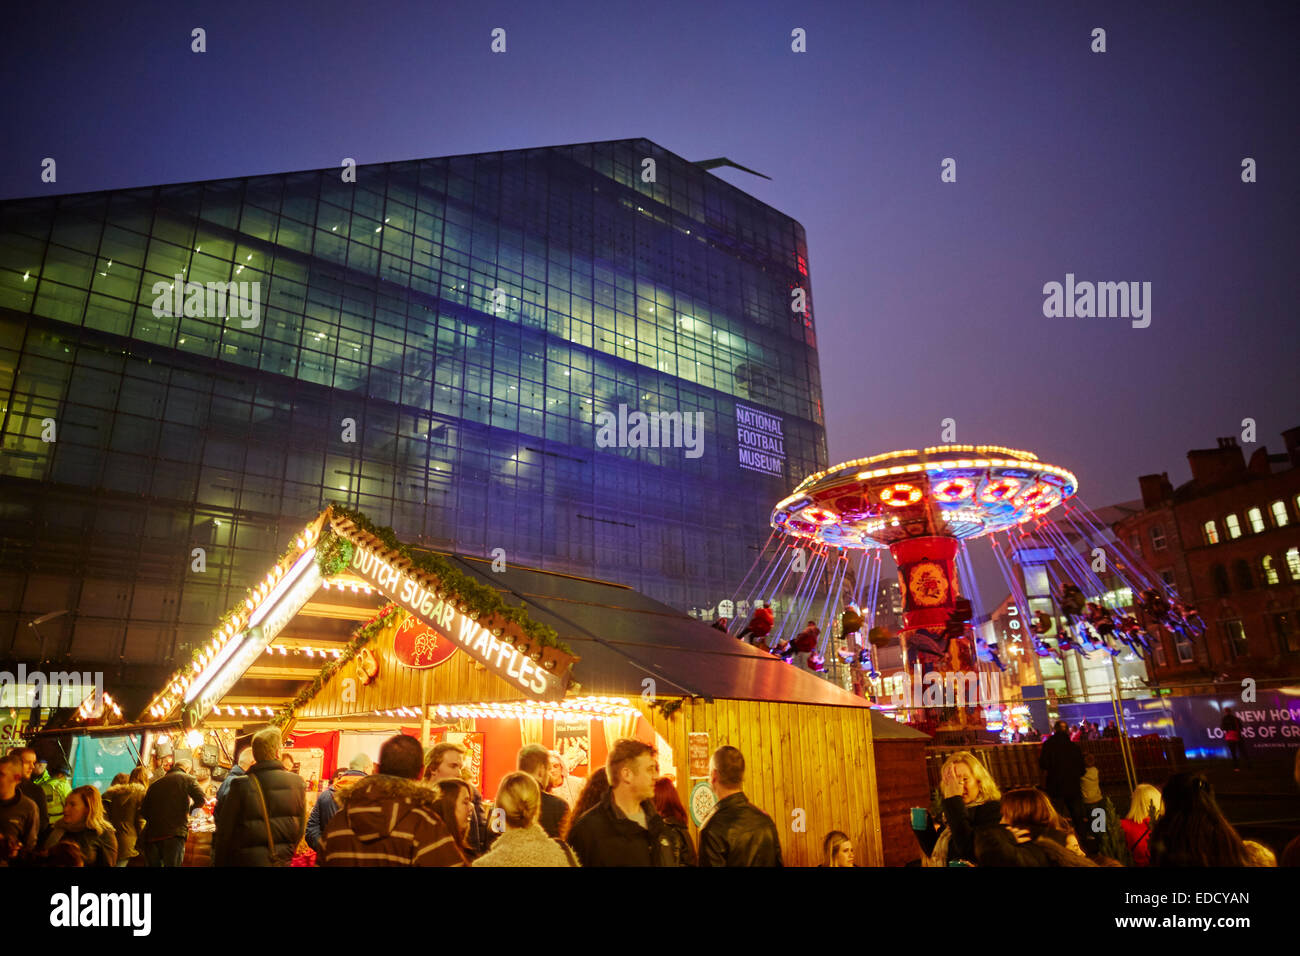 Manchester's German Christmas Markets, in the new location of Cathedral gardens  fairground ride Swing Ride Stock Photo